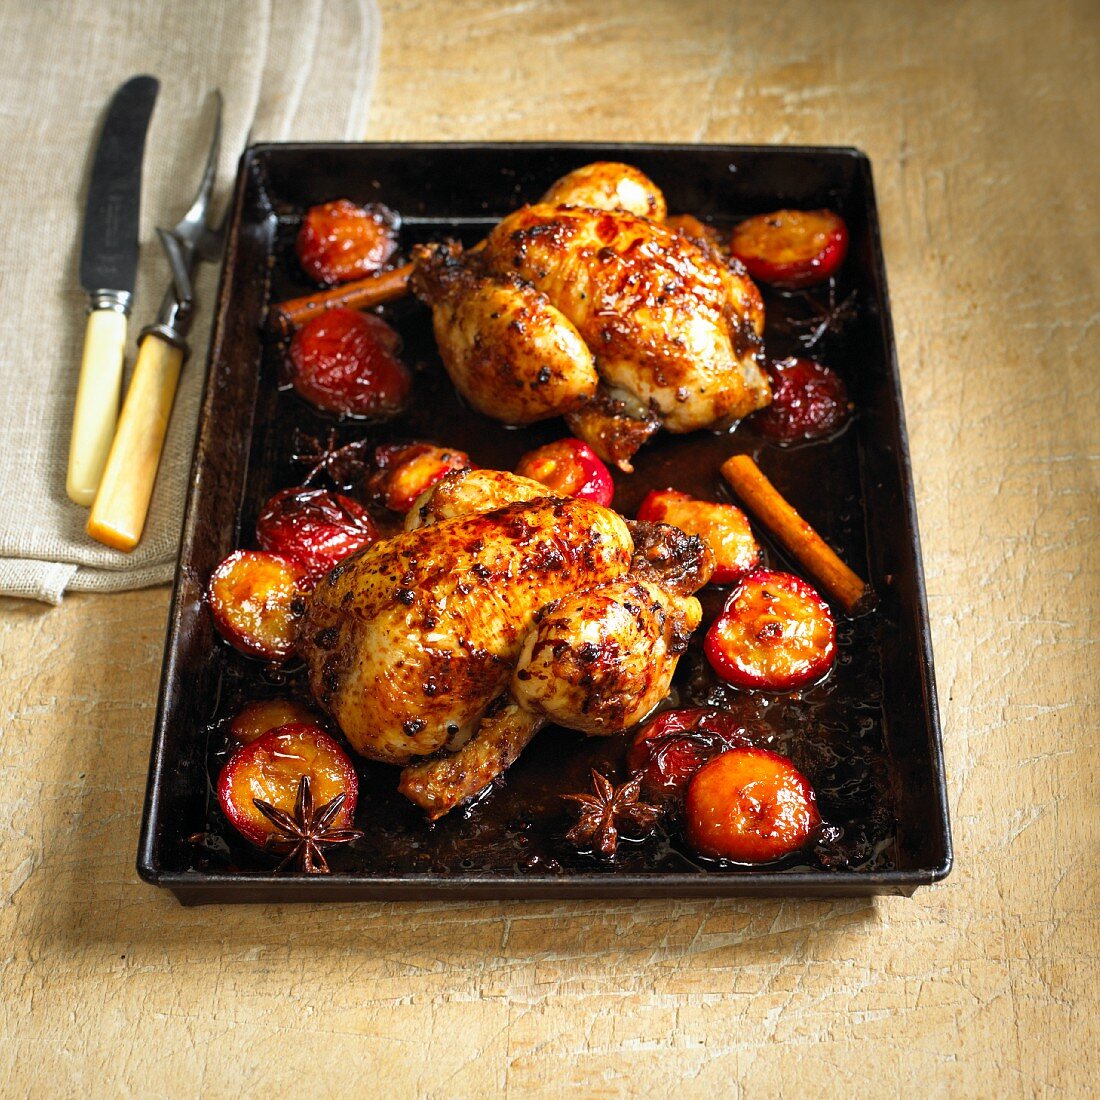 Roasted poussin with star anise, cinnamon and plums